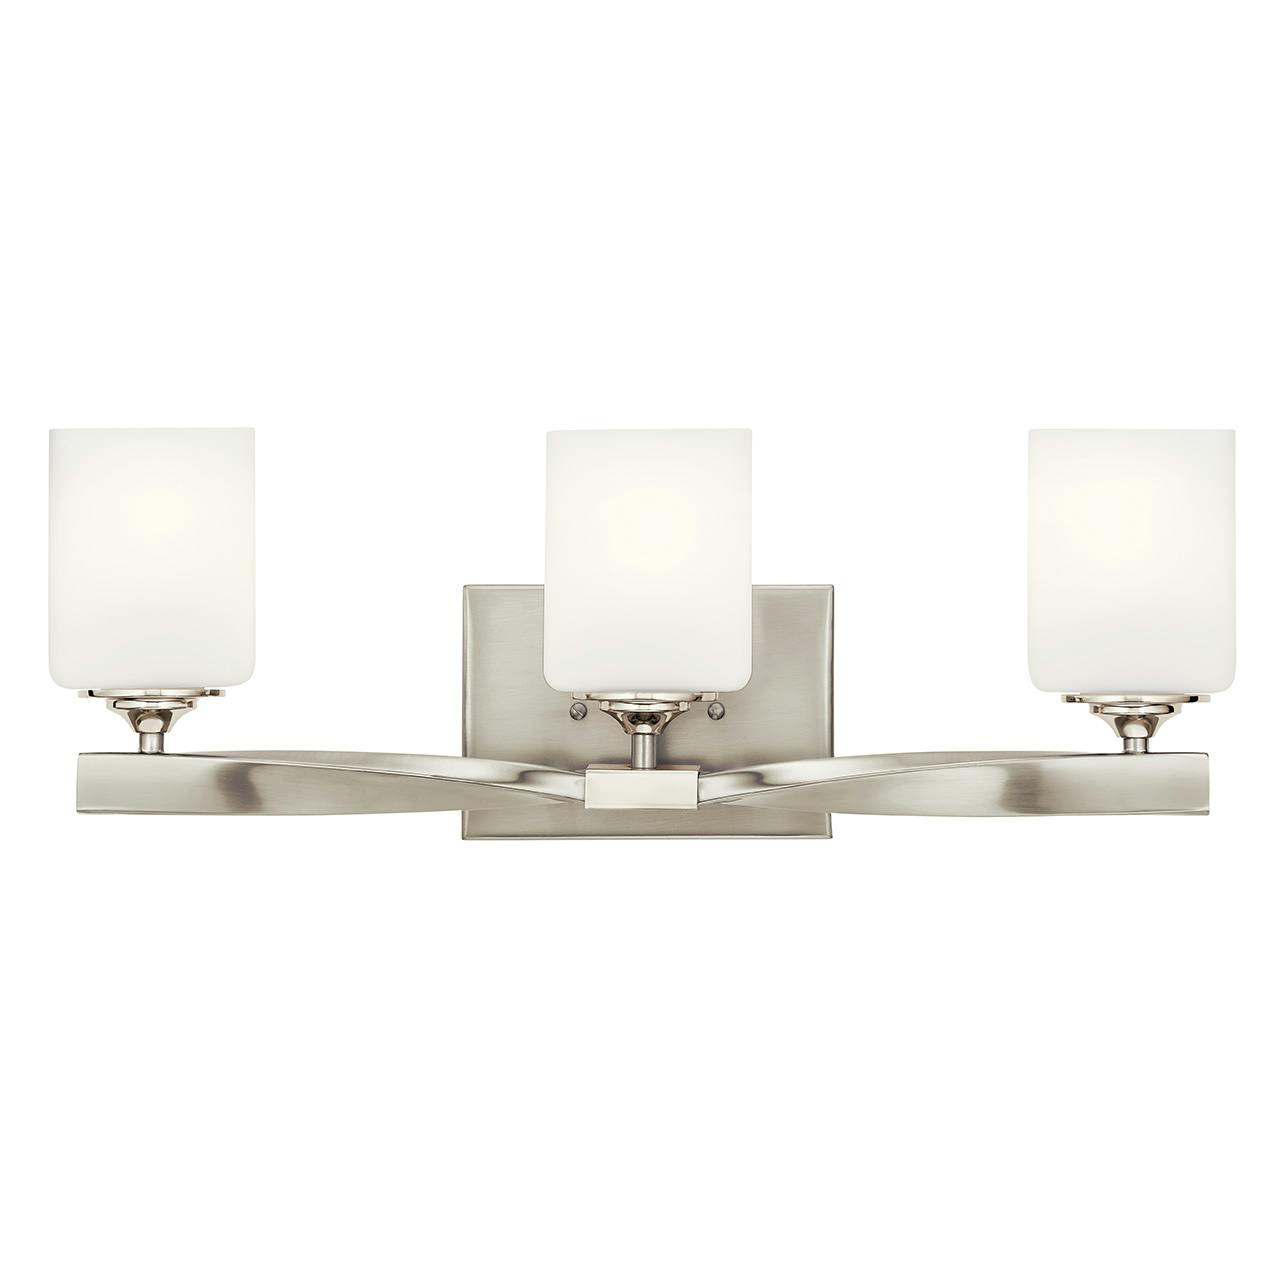 The Marette 3 Light Vanity Light Nickel facing up on a white background